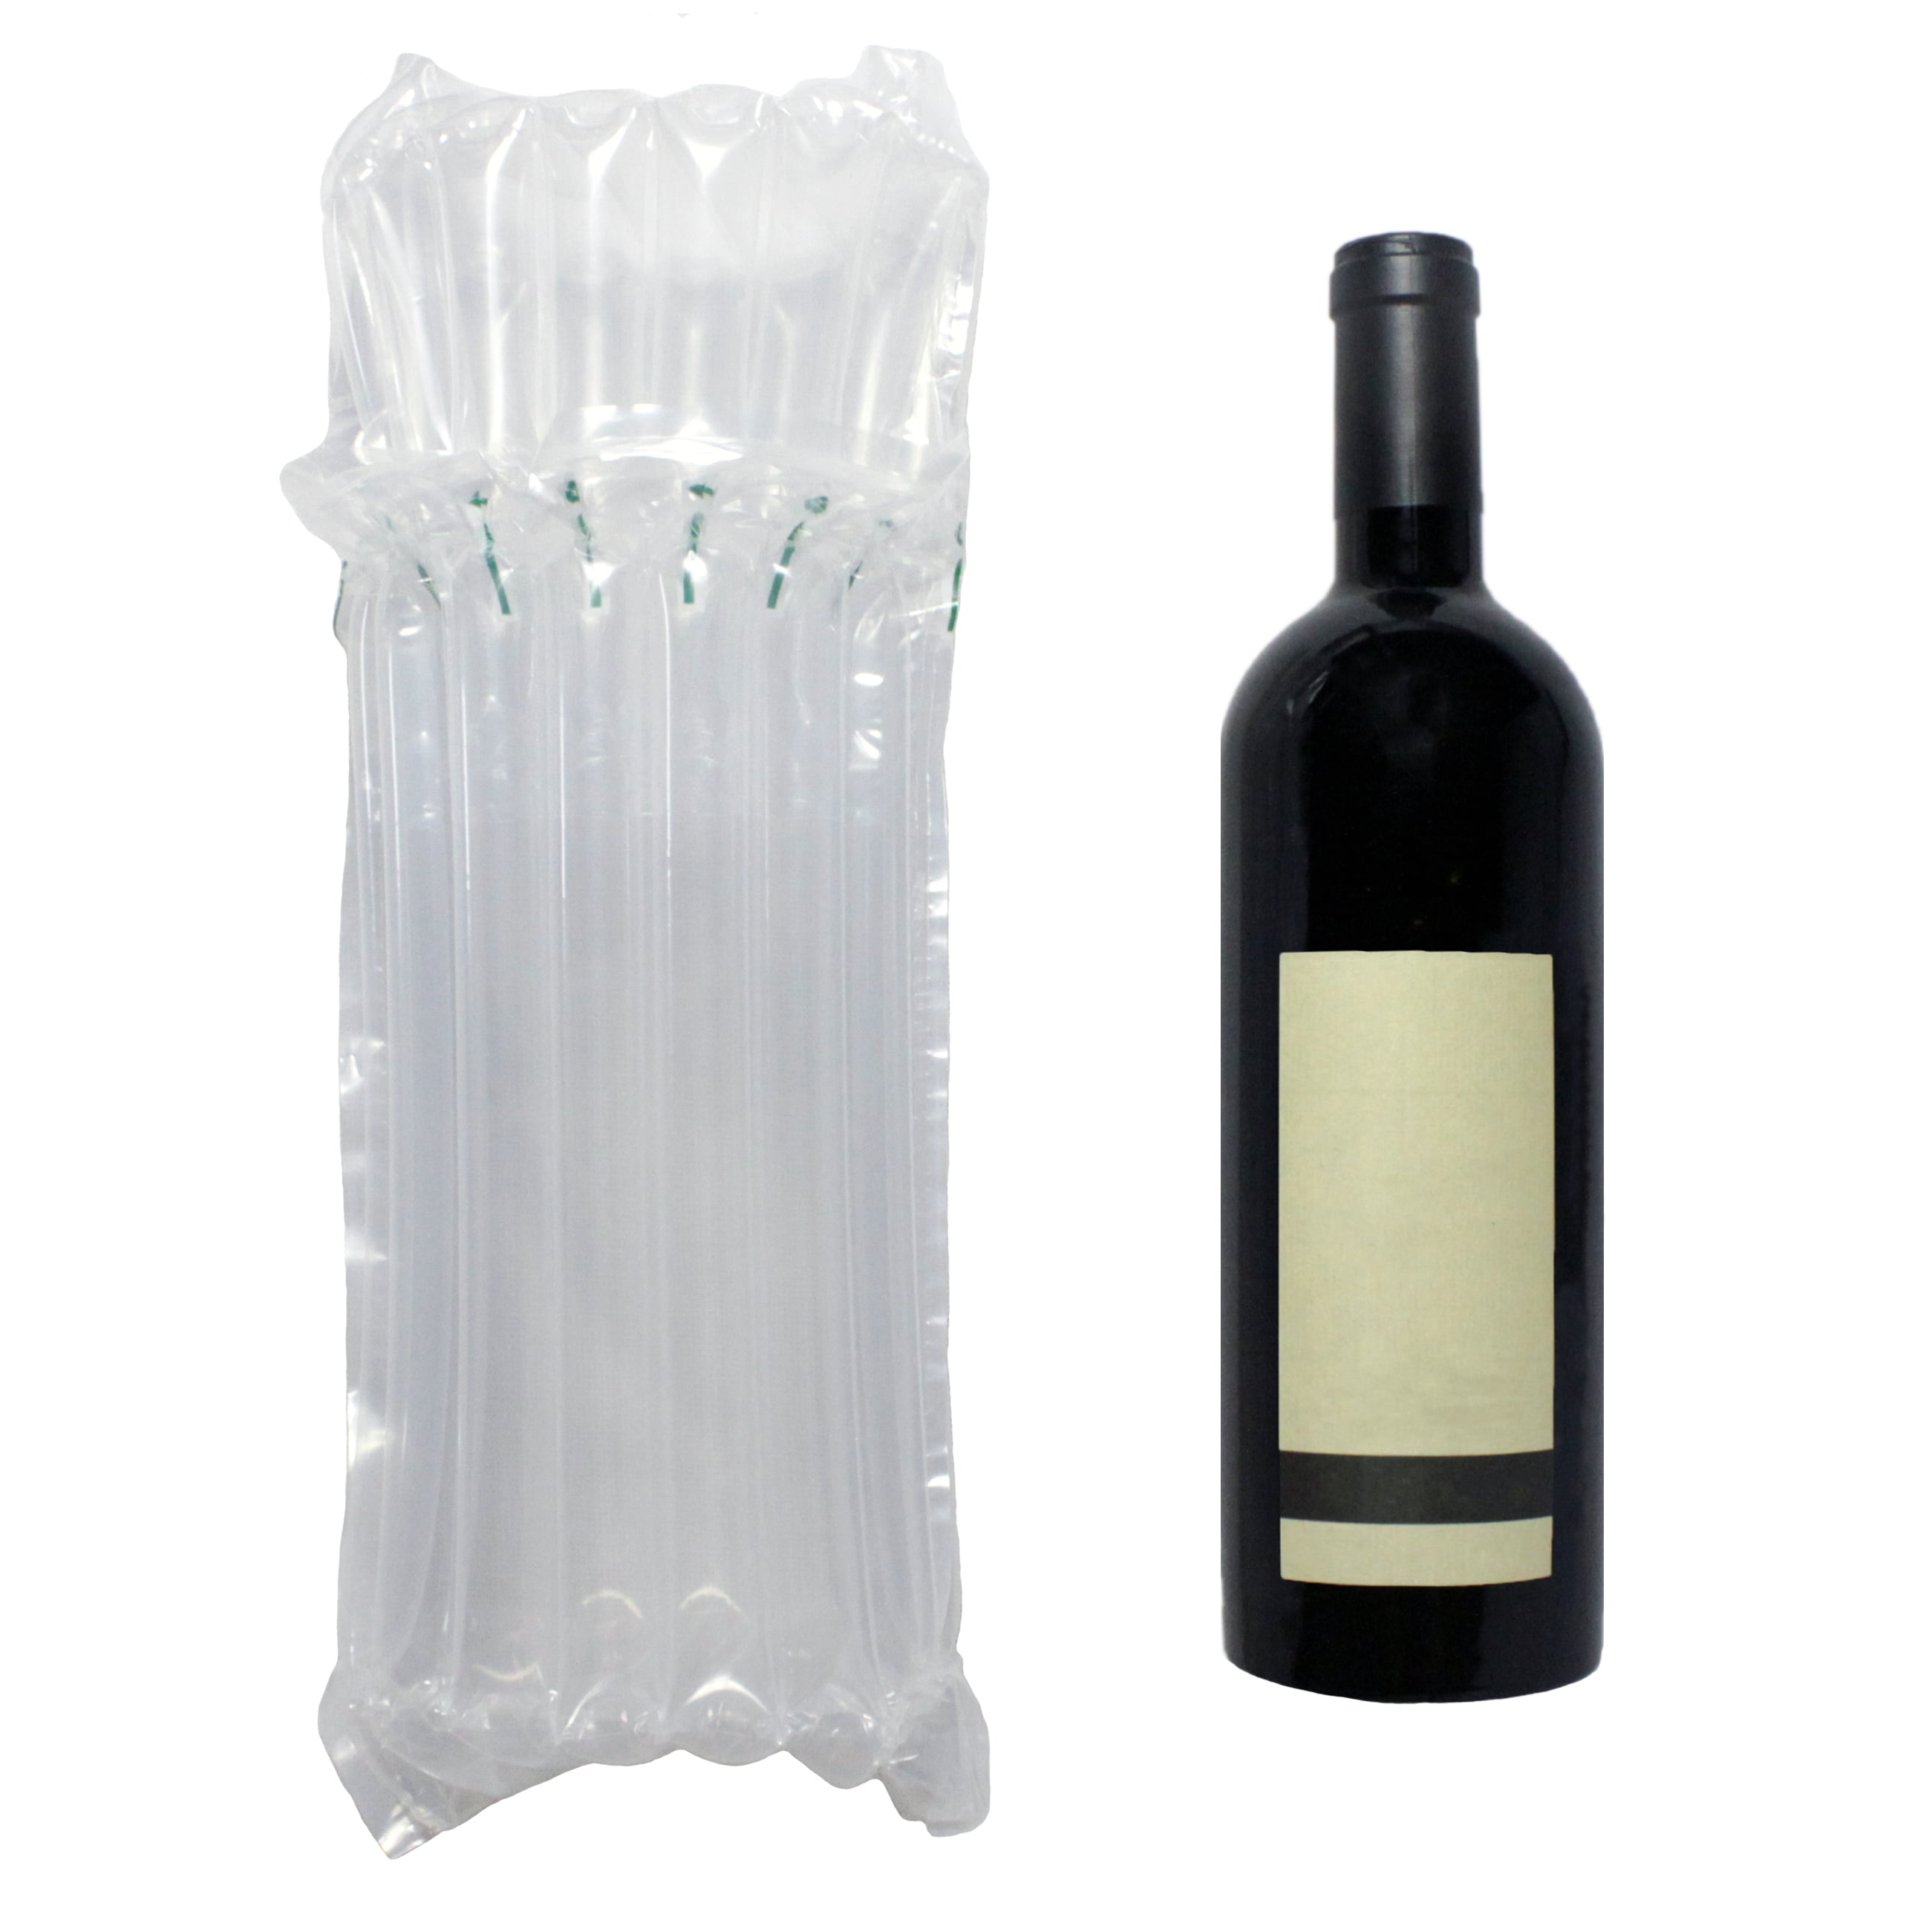 Wine Bottle Protector,18 Pieces Inflatable Air Column Cushioning Sleeves Packaging Ensures Safe Transportation of Glass Bottles during Travel or Shipping with Free Pump Bottle shipping packaging 